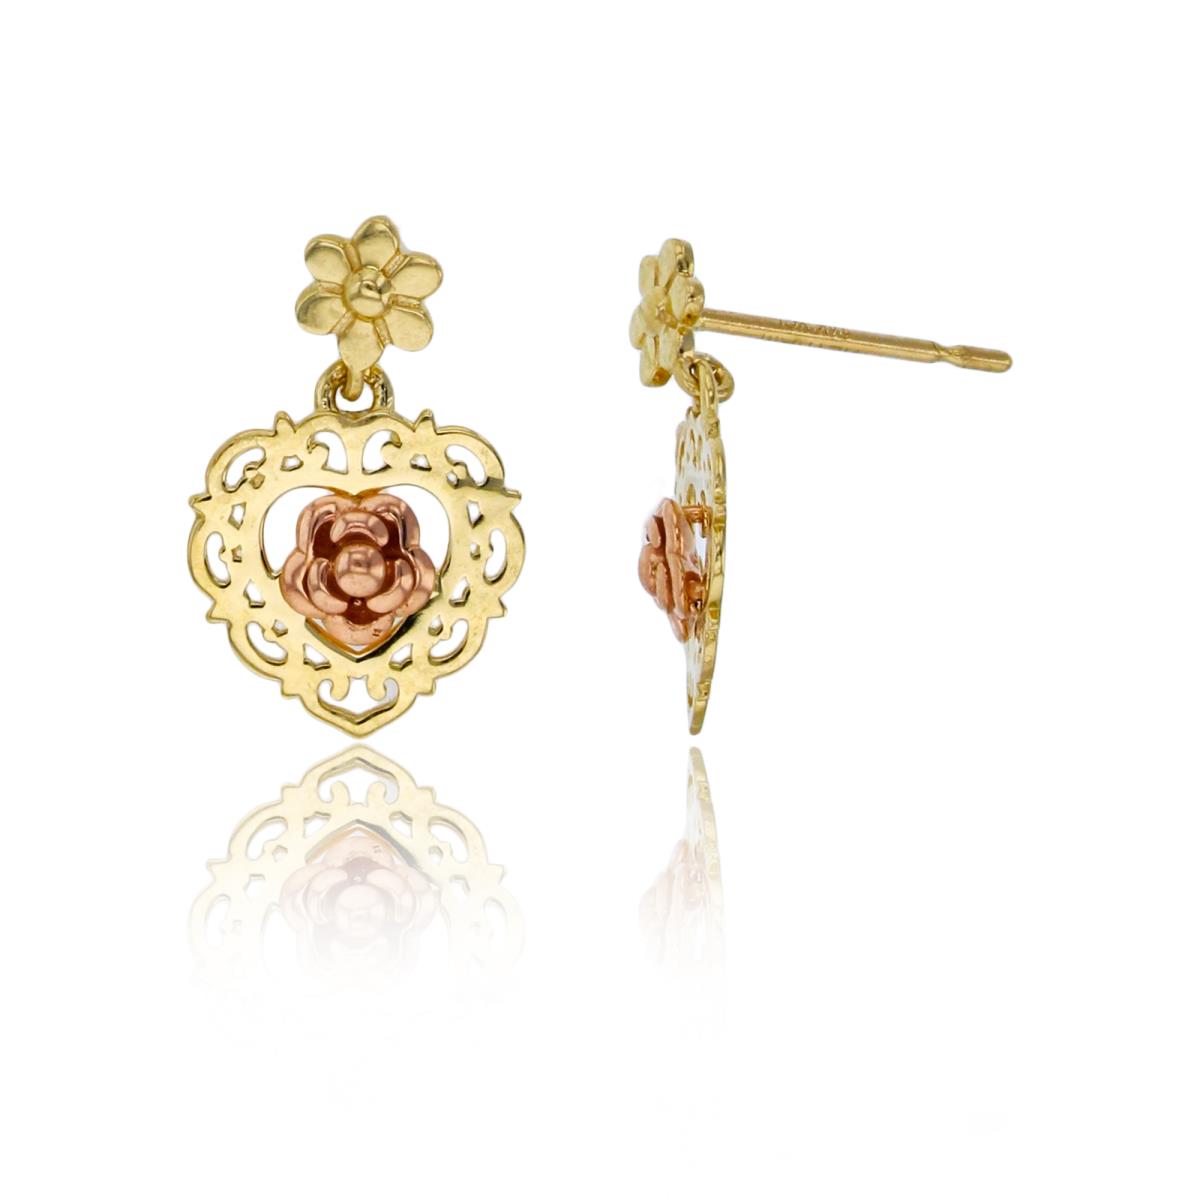 14K Two-Tone Gold 14x9mm Filigree Heart with Center Rose Dangling Earring